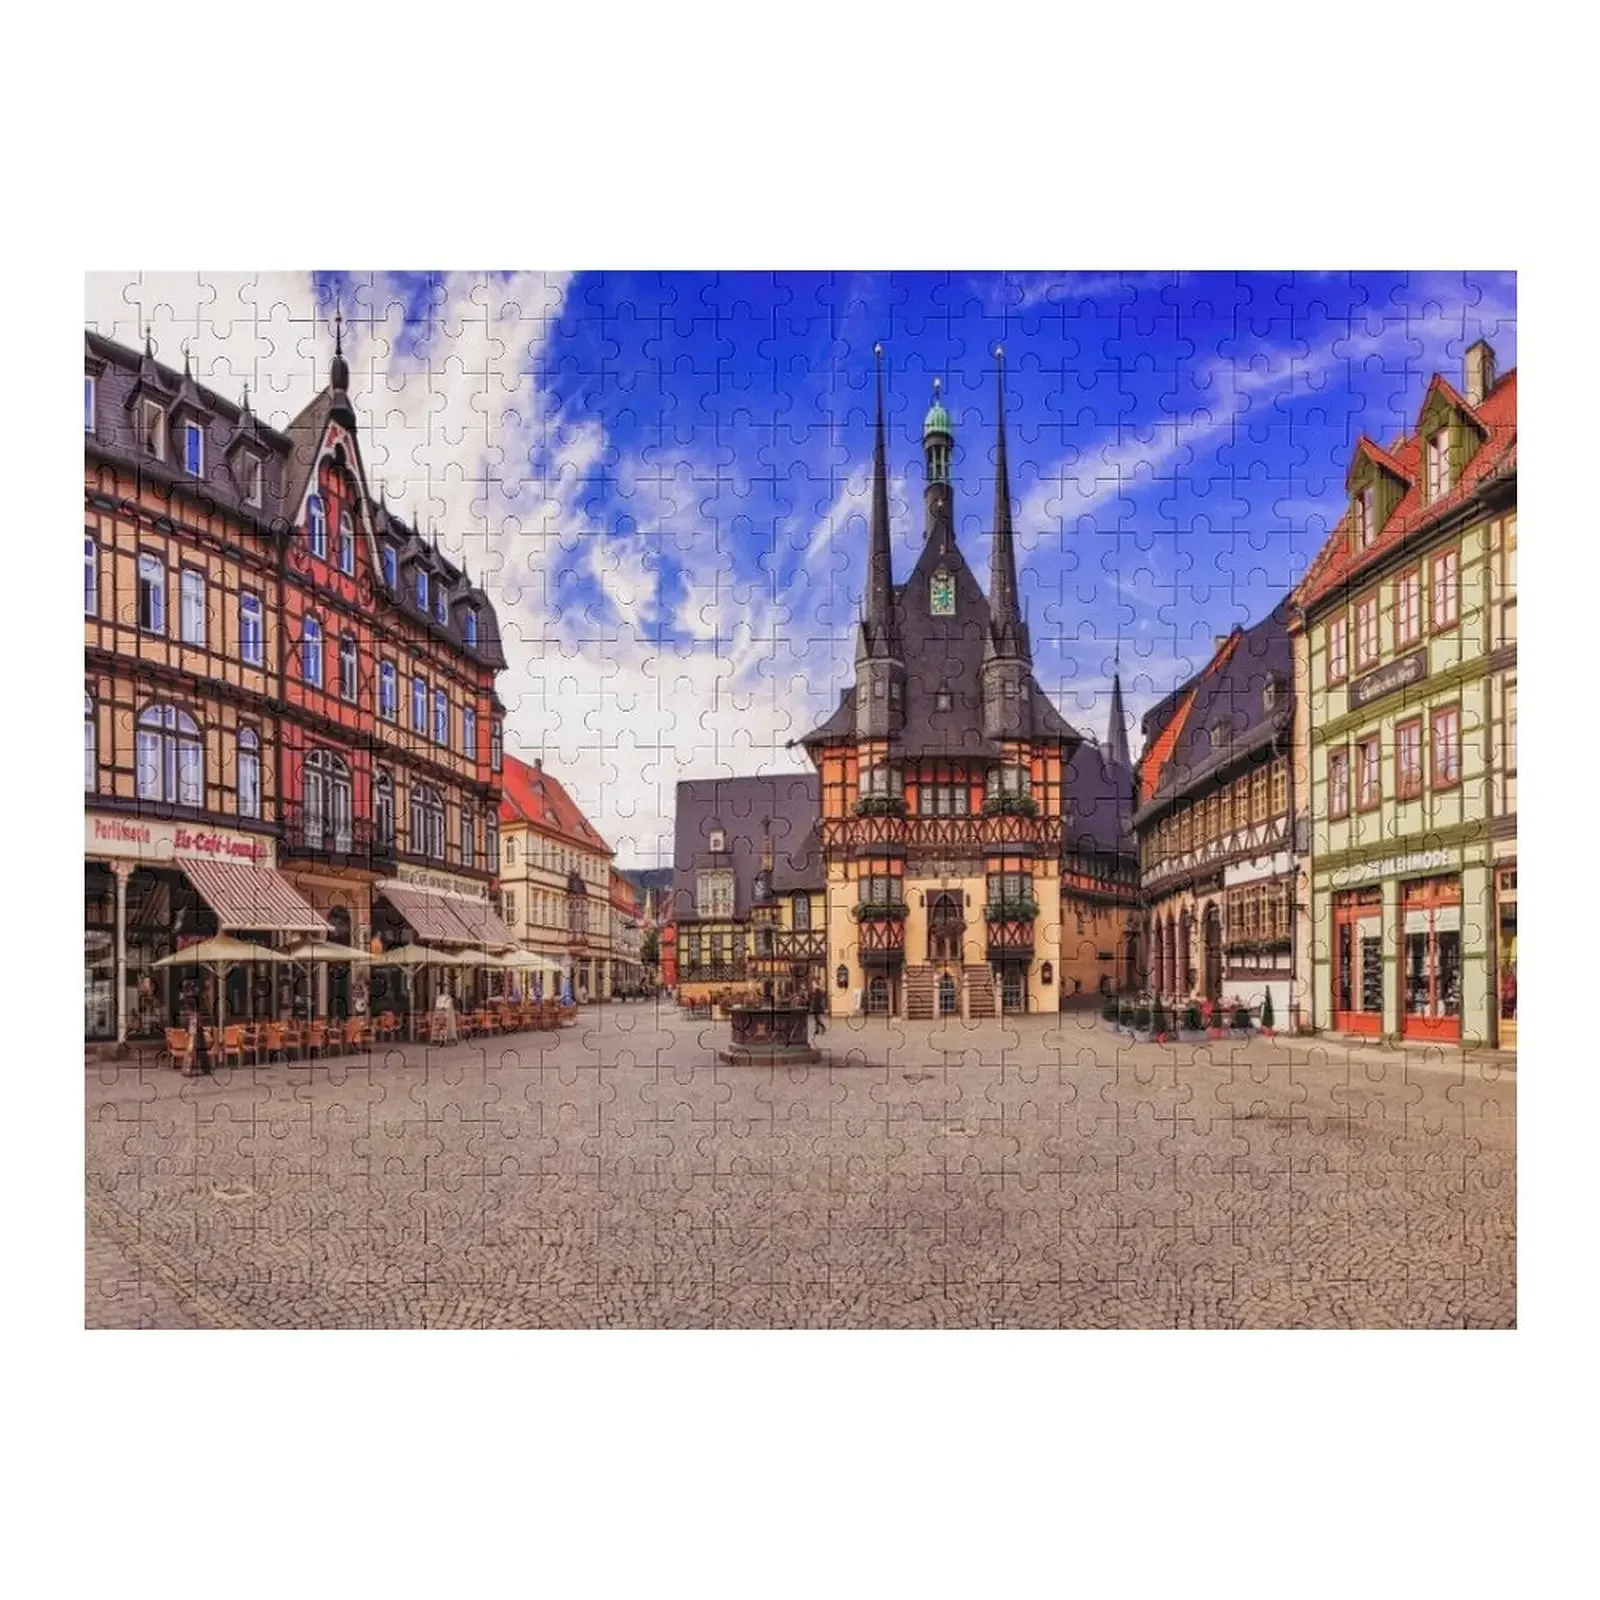 Wernigerode (Germany) Jigsaw Puzzle Photo Custom Custom Personalized Gift Married Personalized Child Gift Puzzle 1000 kilometers race germany jigsaw puzzle personalized baby toy personalized gift married puzzle